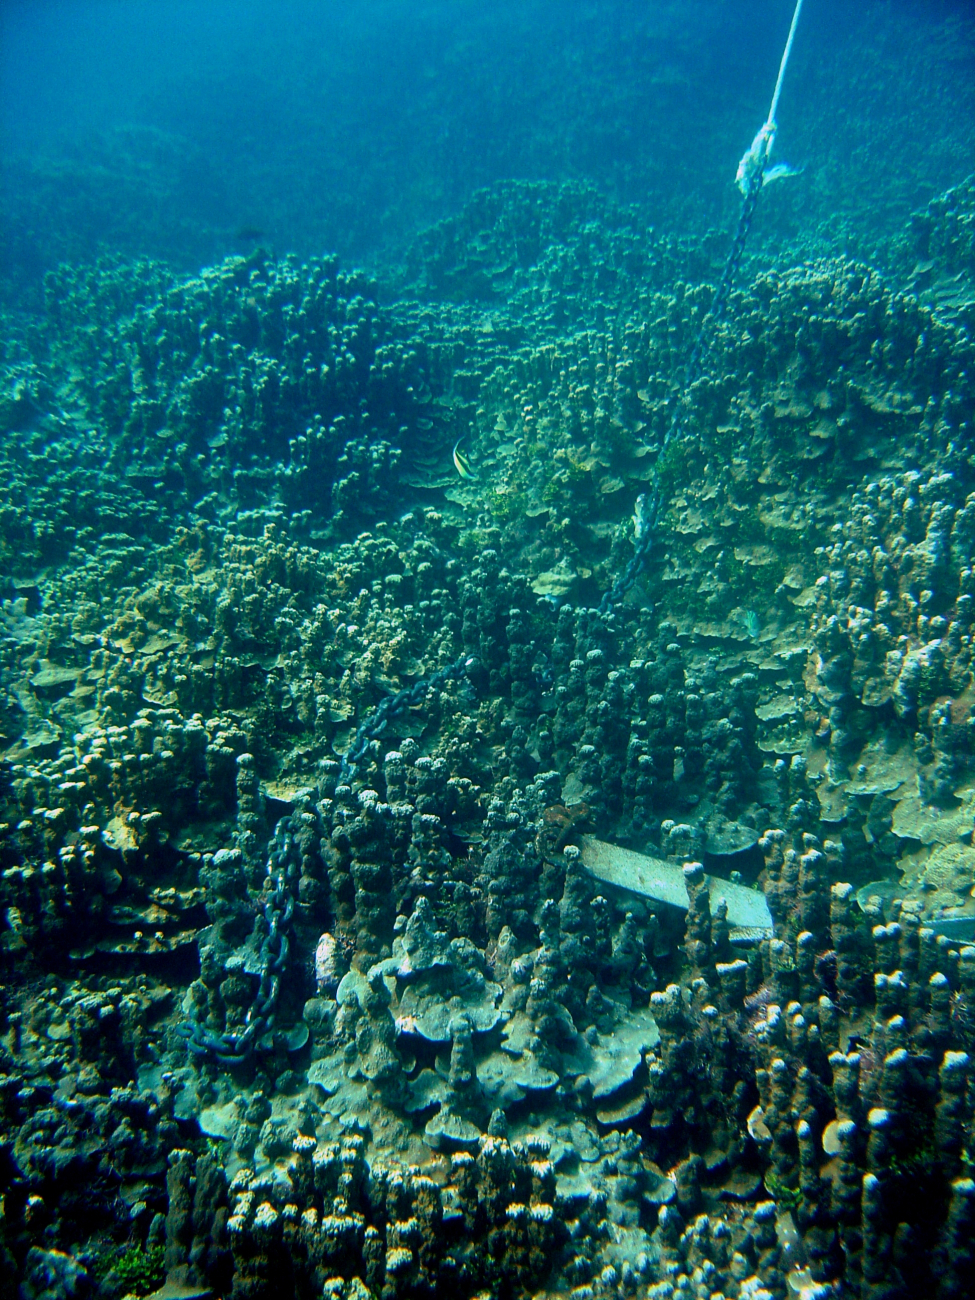 Careless anchoring adds to stress on otherwise healthy coral reef